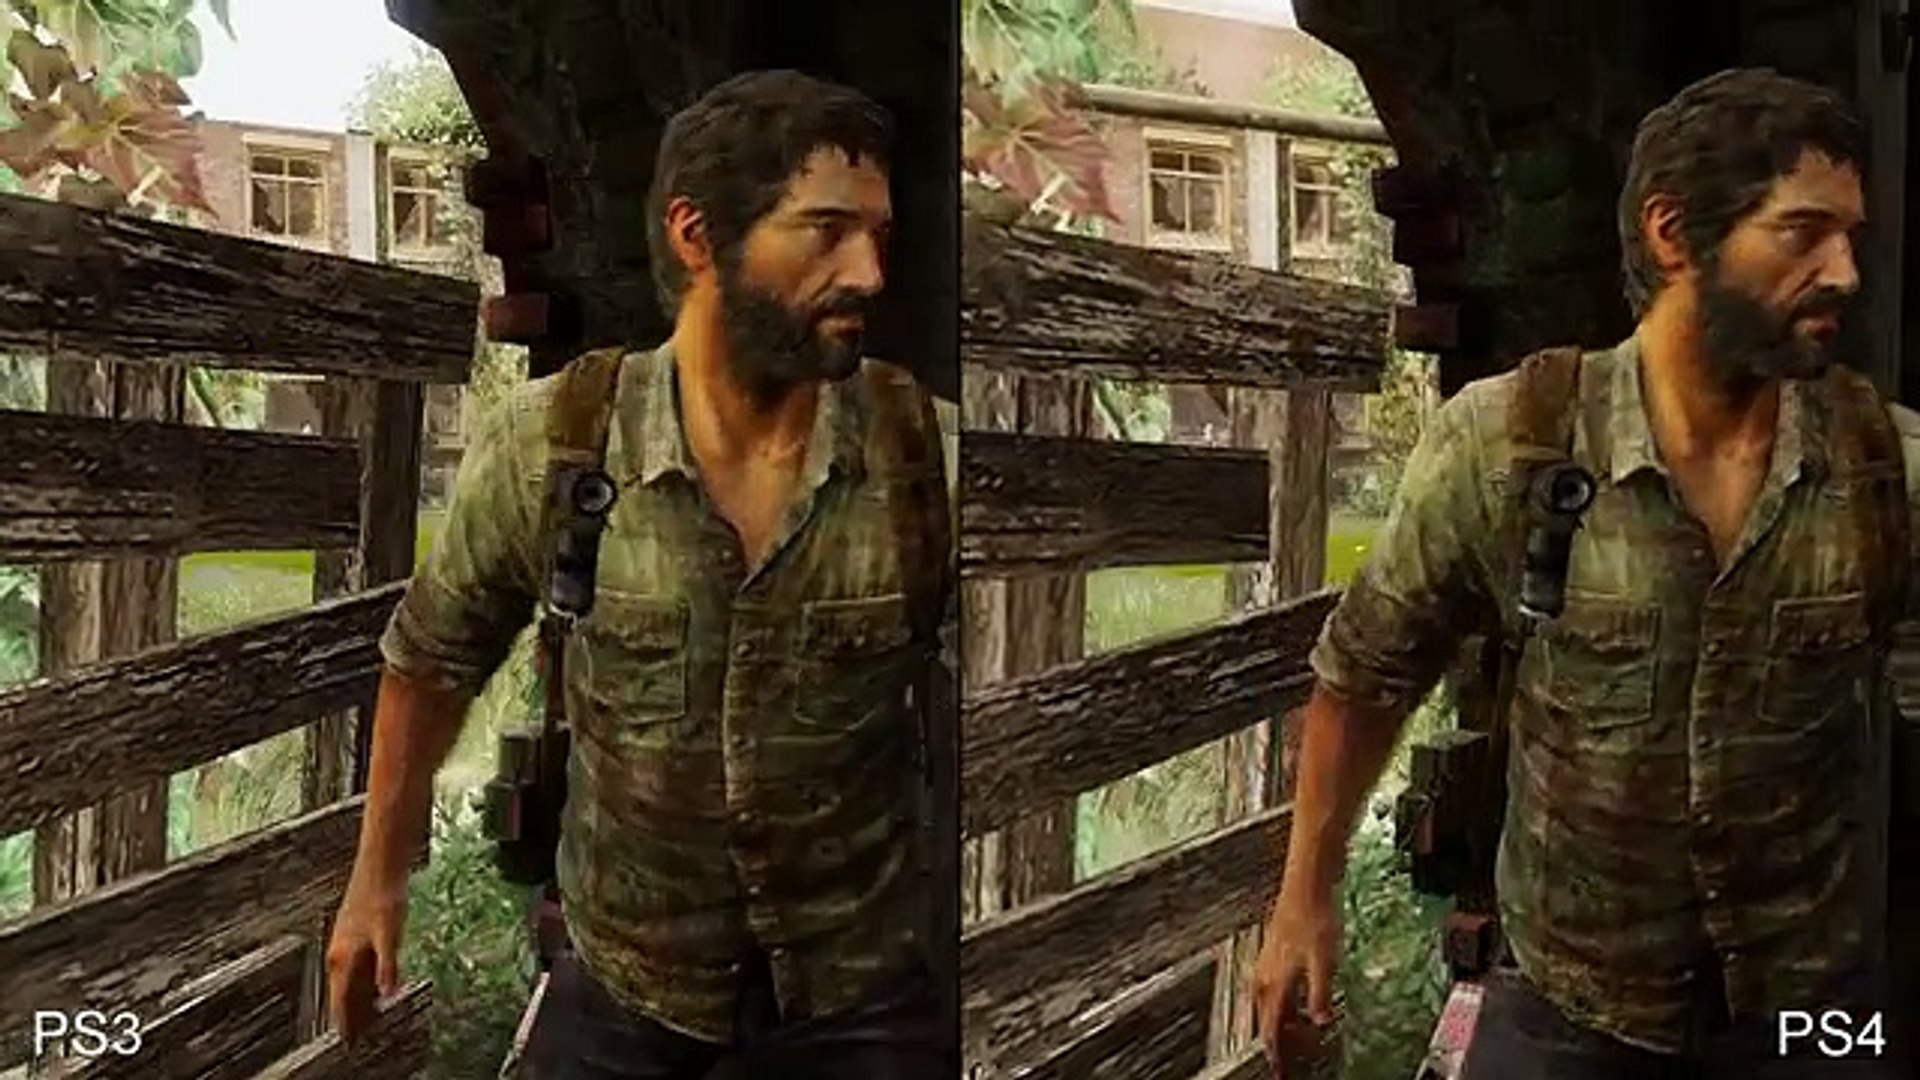 The Last of Us (PS3) Vs The Last of Us Remastered (PS4) Vs The